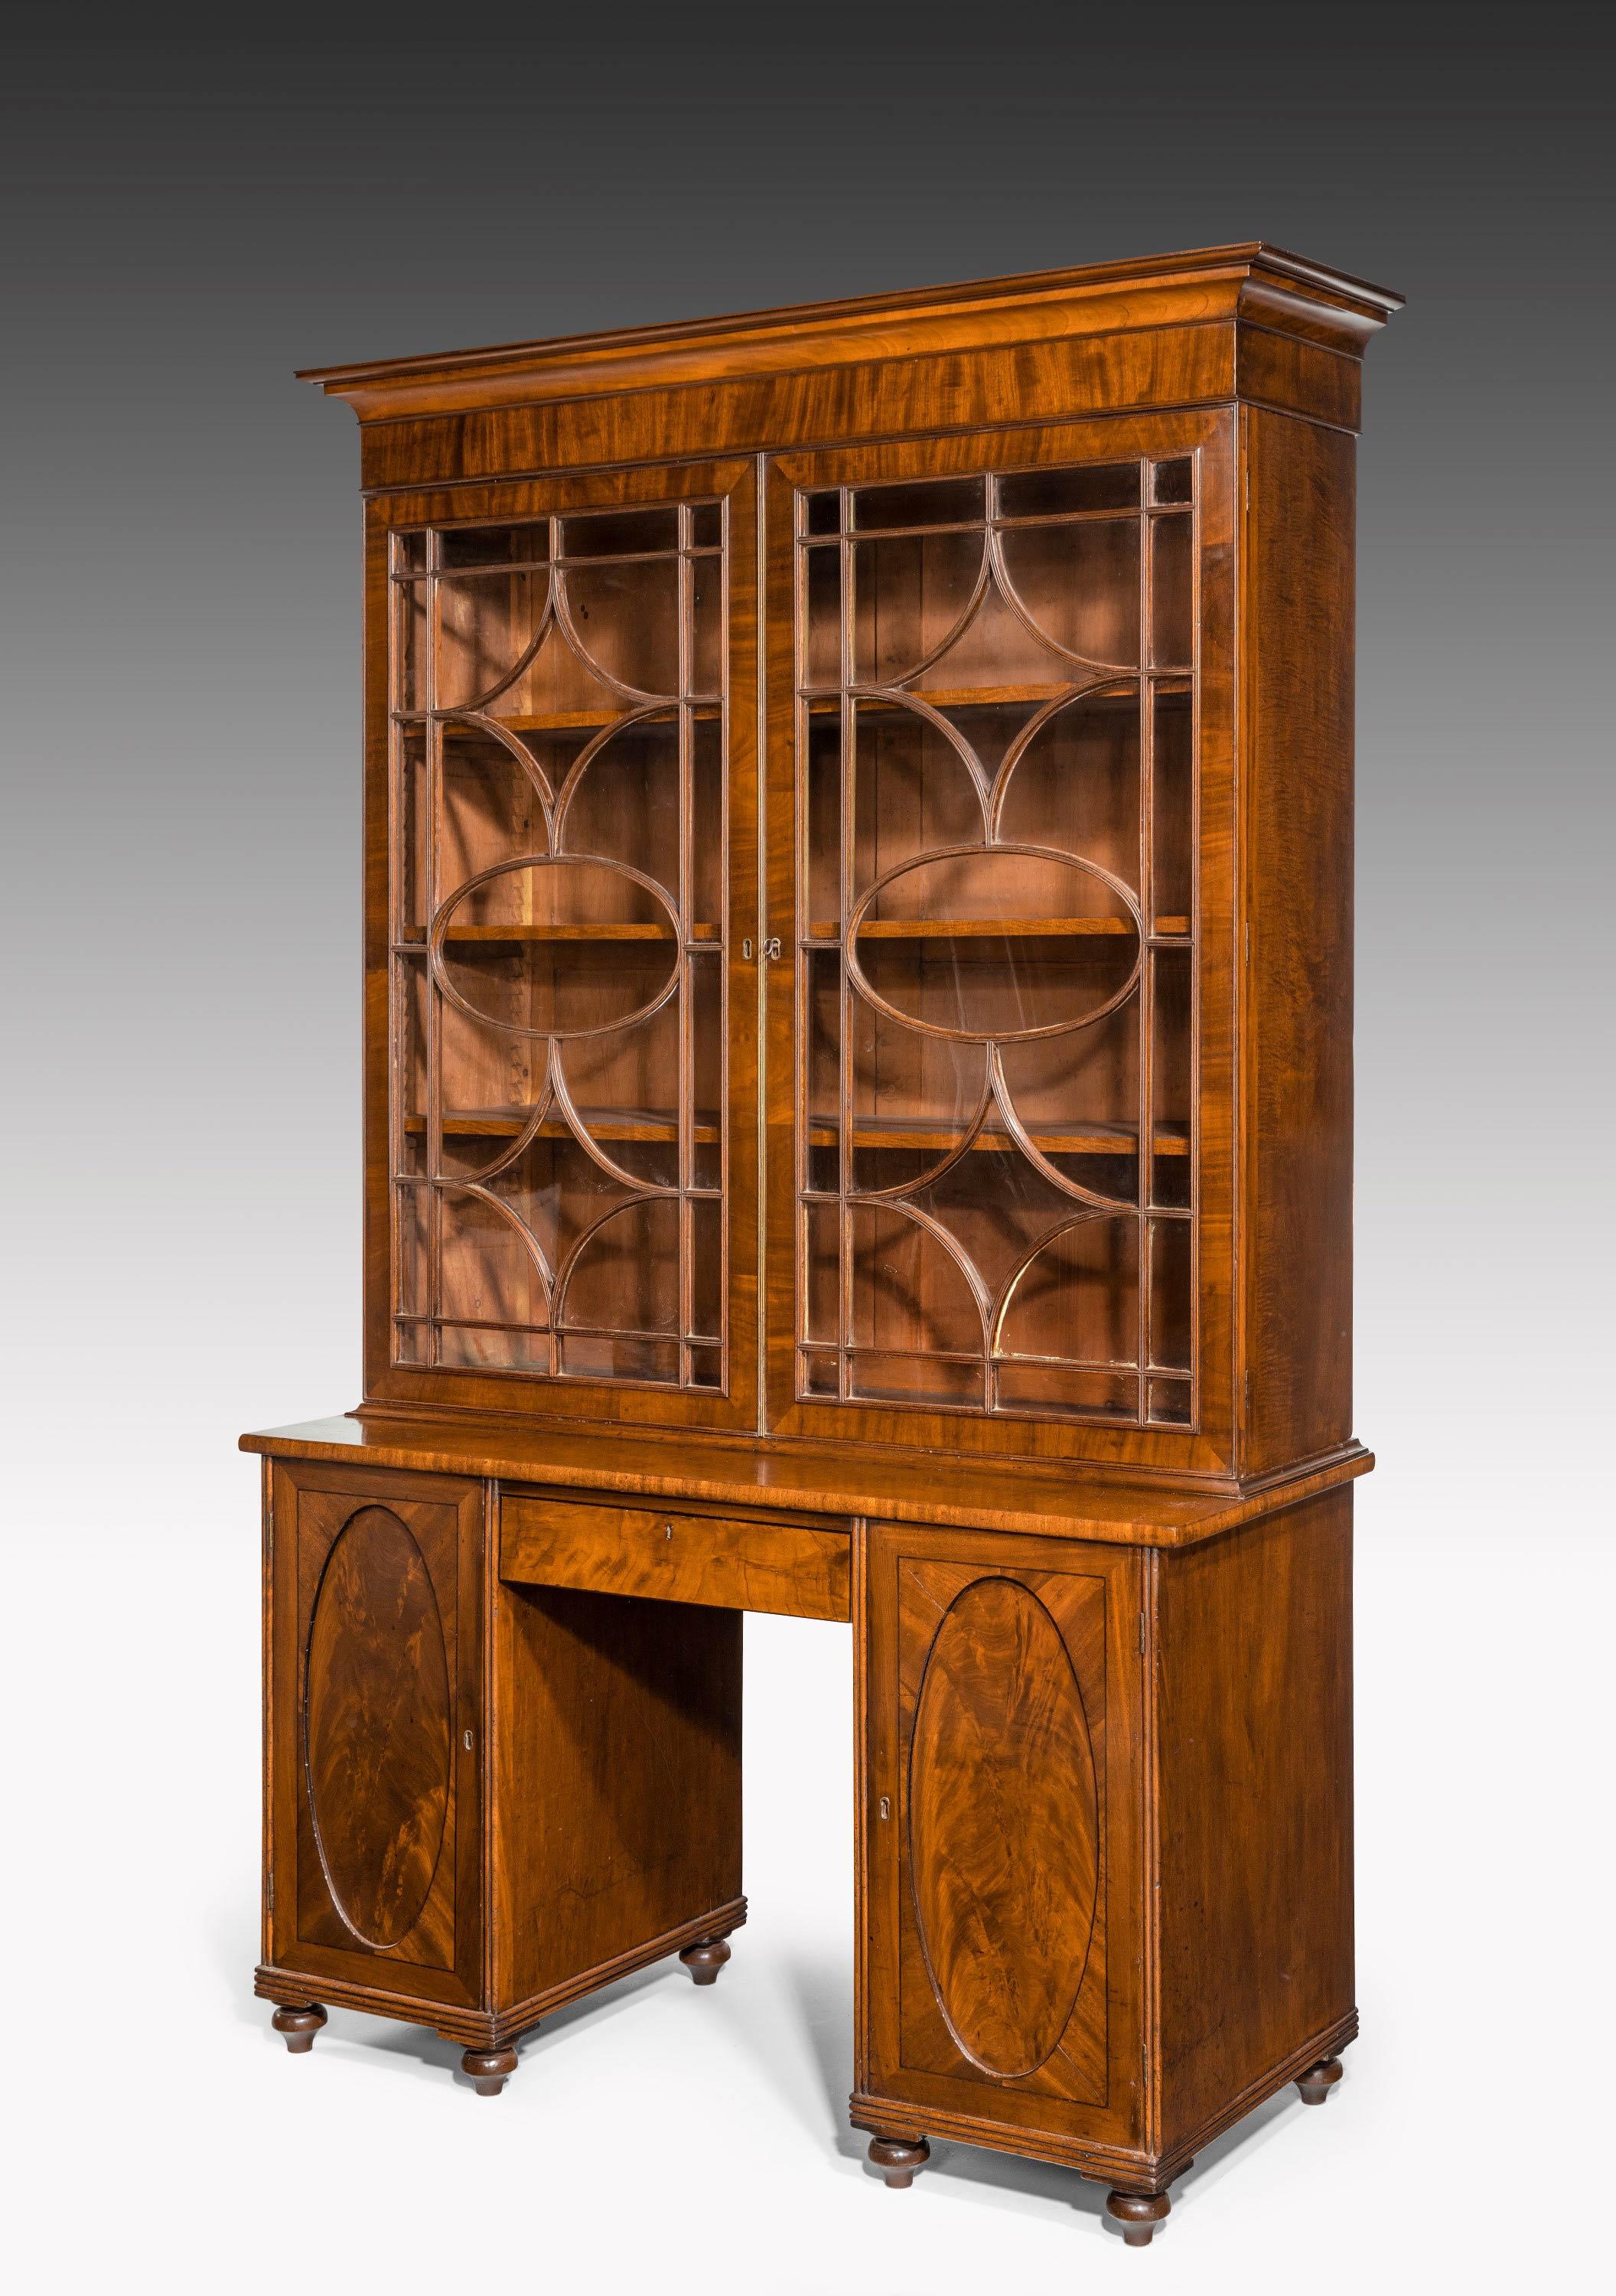 English An Unusual George III Period Bookcase with Kneehole